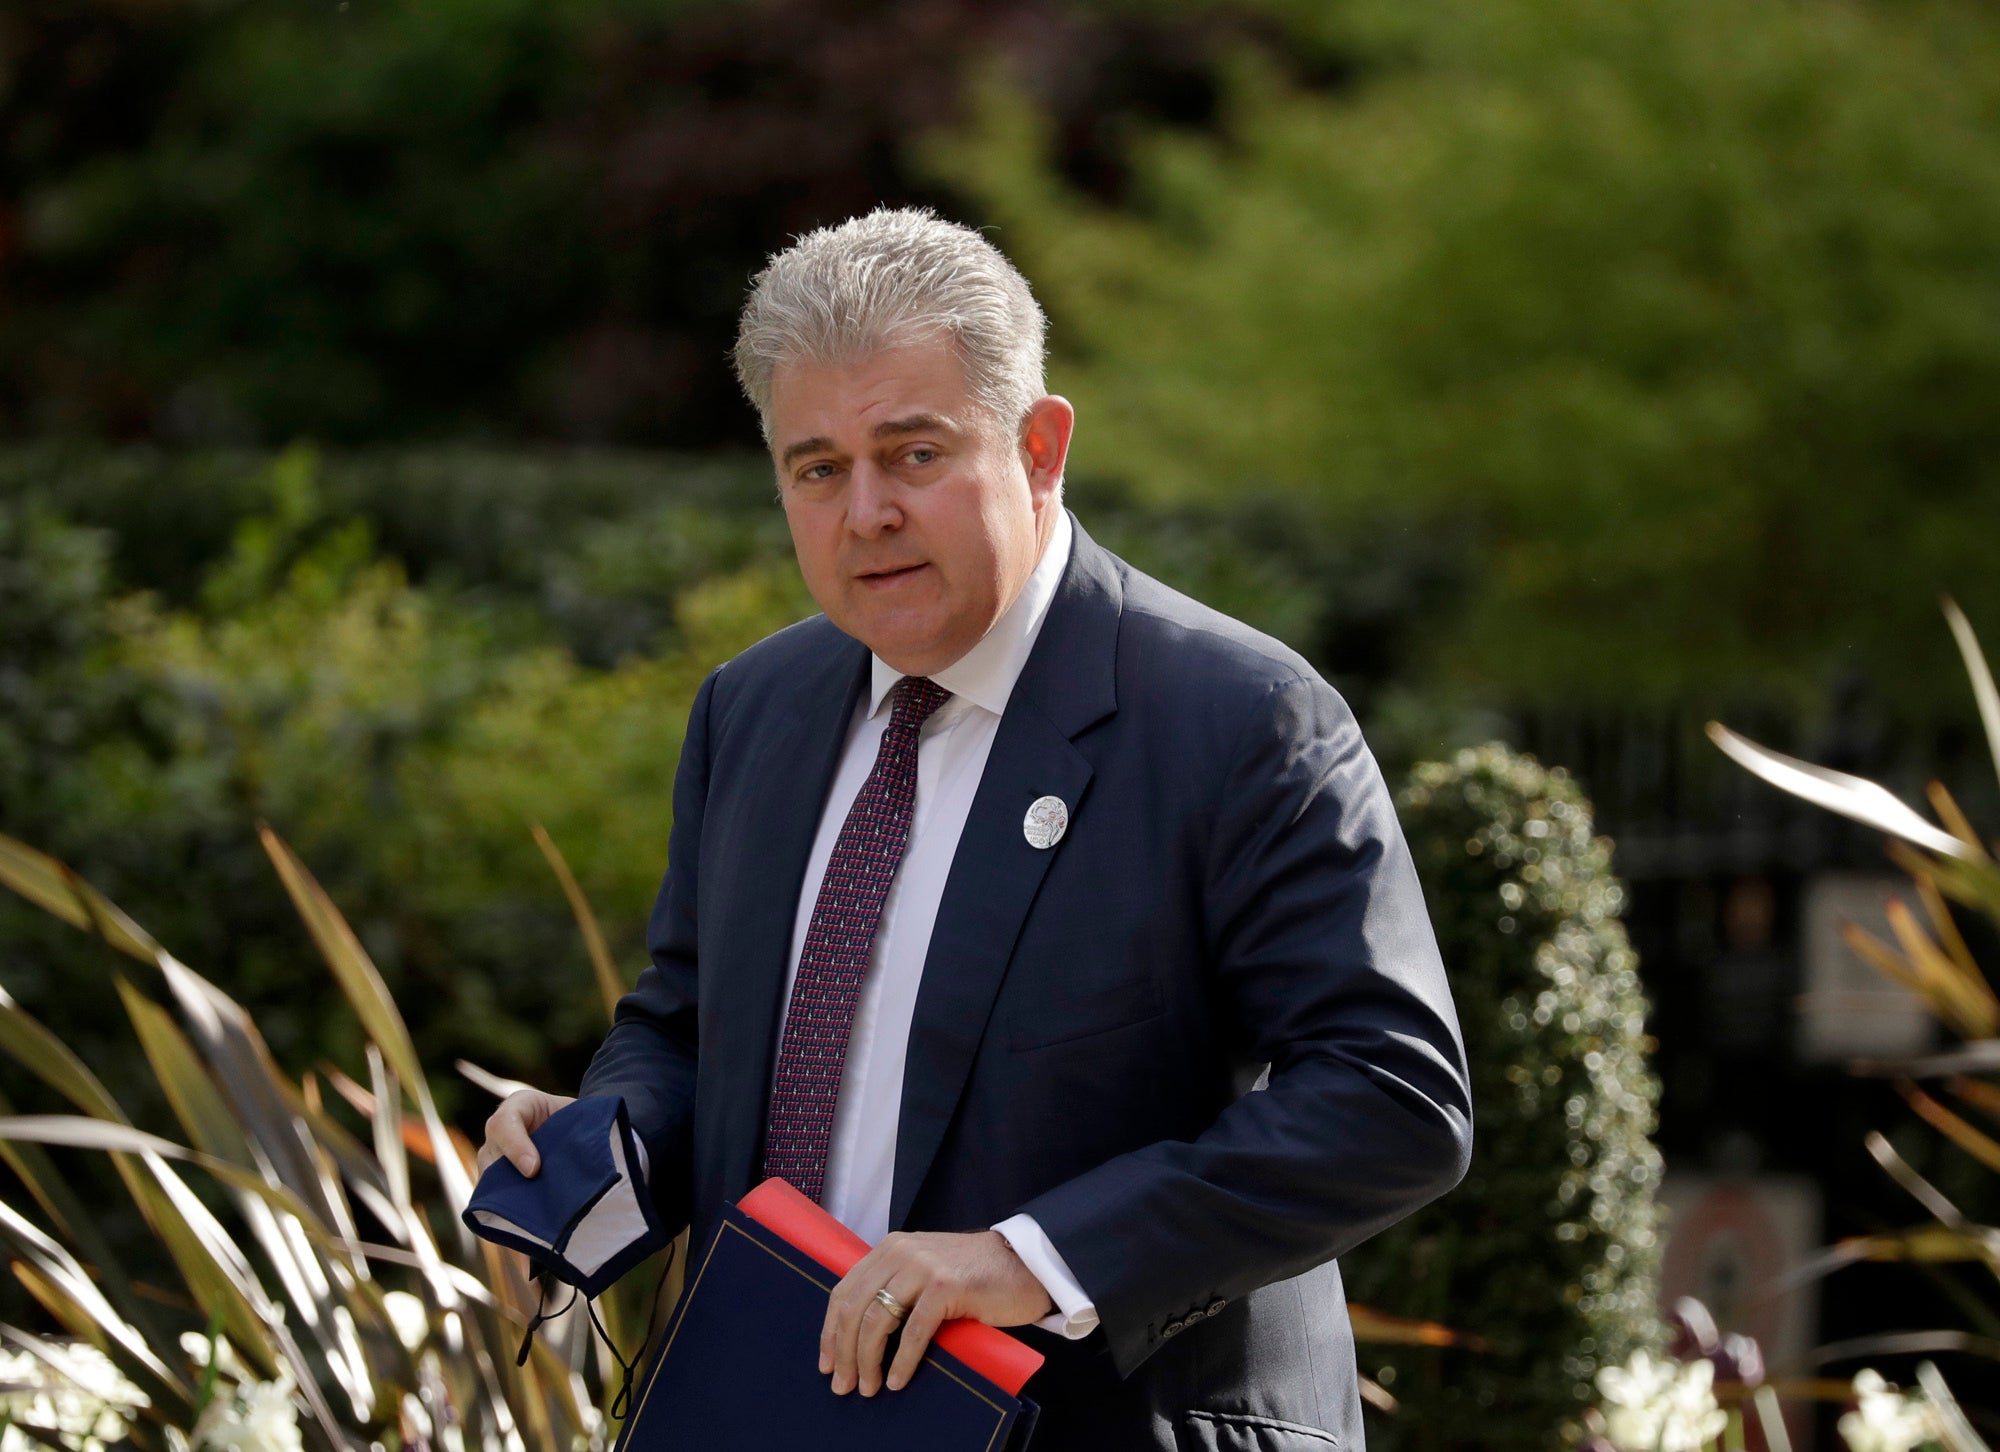 Northern Ireland Secretary Brandon Lewis: ‘We know that the prospect of the end of criminal prosecutions will be difficult for some to accept, and this is not a position we take lightly’